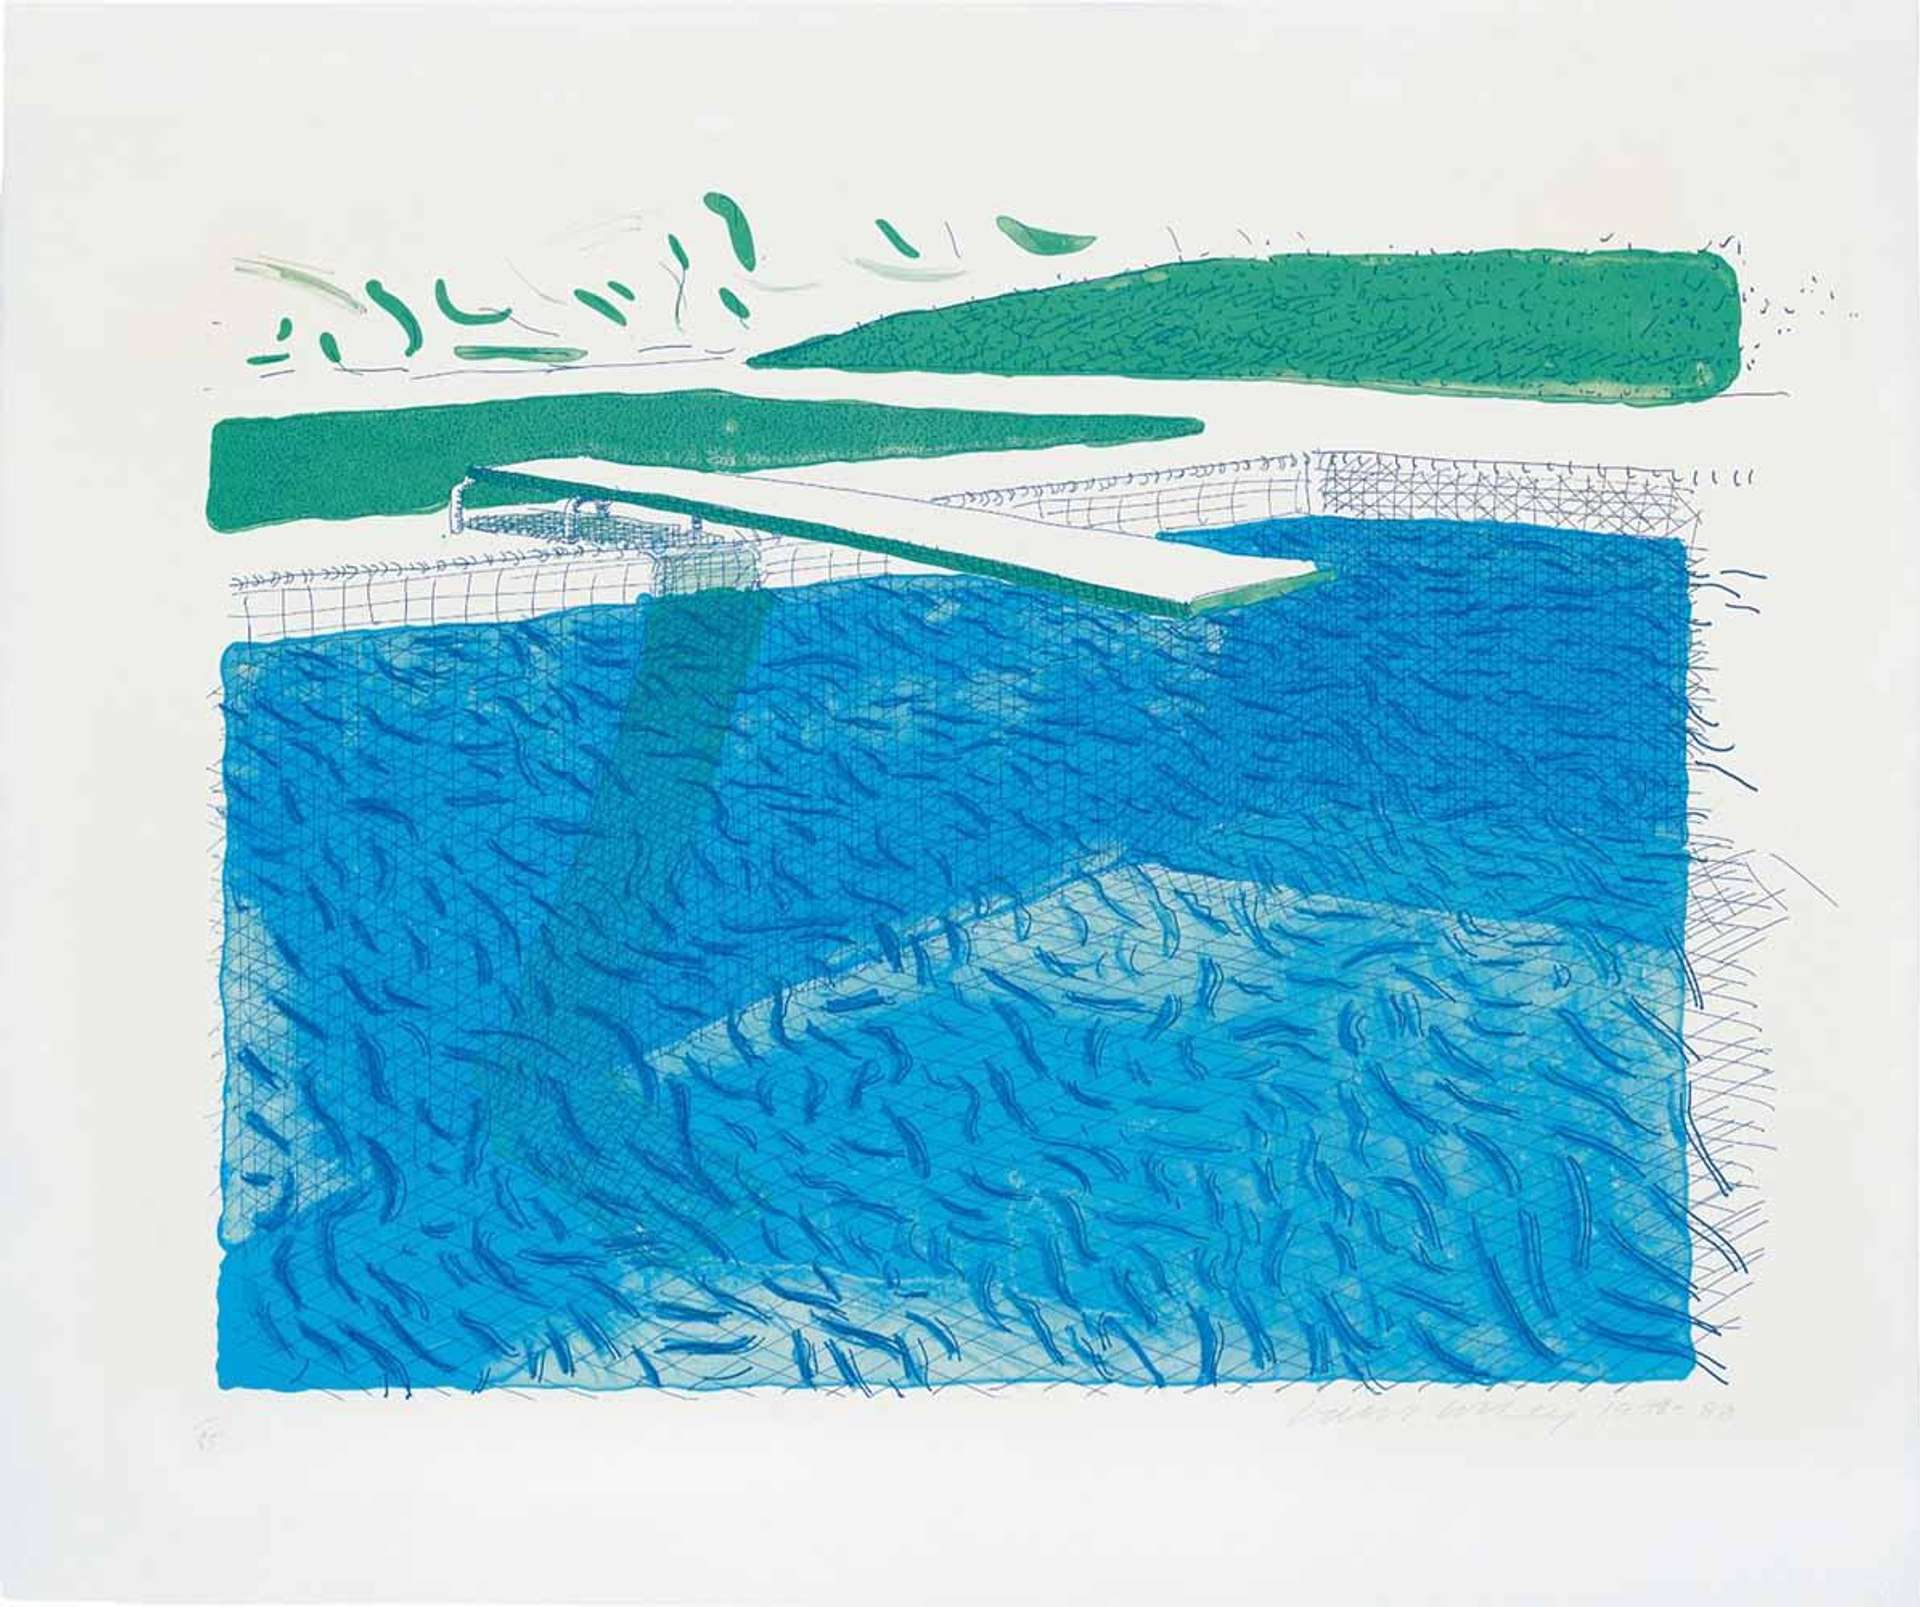 Lithographic Water Made Of Lines, Crayon, And Two Blue Washes - Signed Print by David Hockney 1980 - MyArtBroker